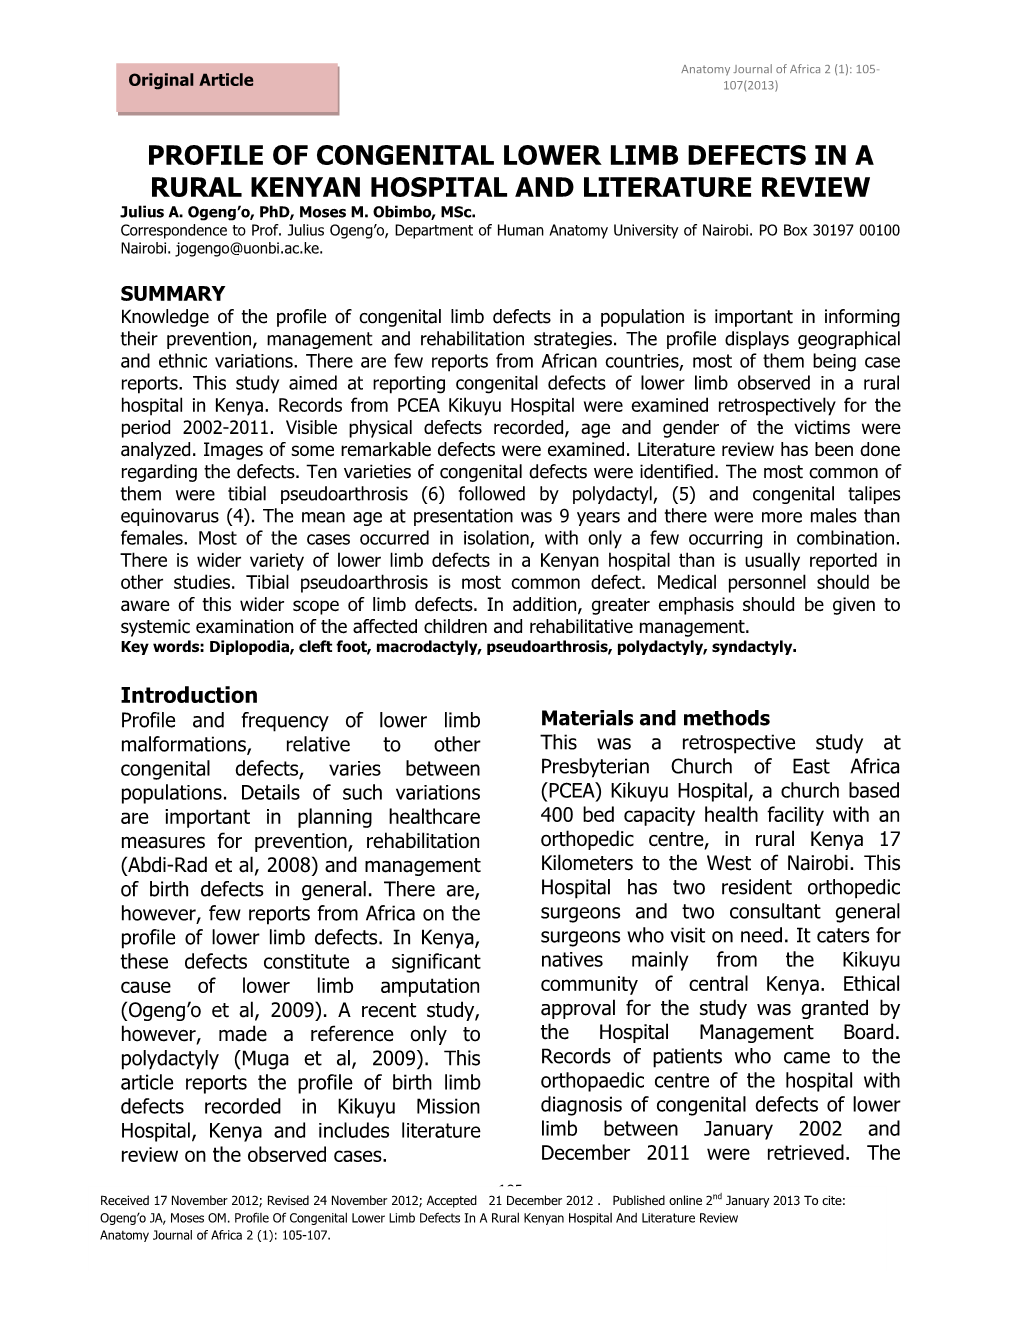 PROFILE of CONGENITAL LOWER LIMB DEFECTS in a RURAL KENYAN HOSPITAL and LITERATURE REVIEW Julius A